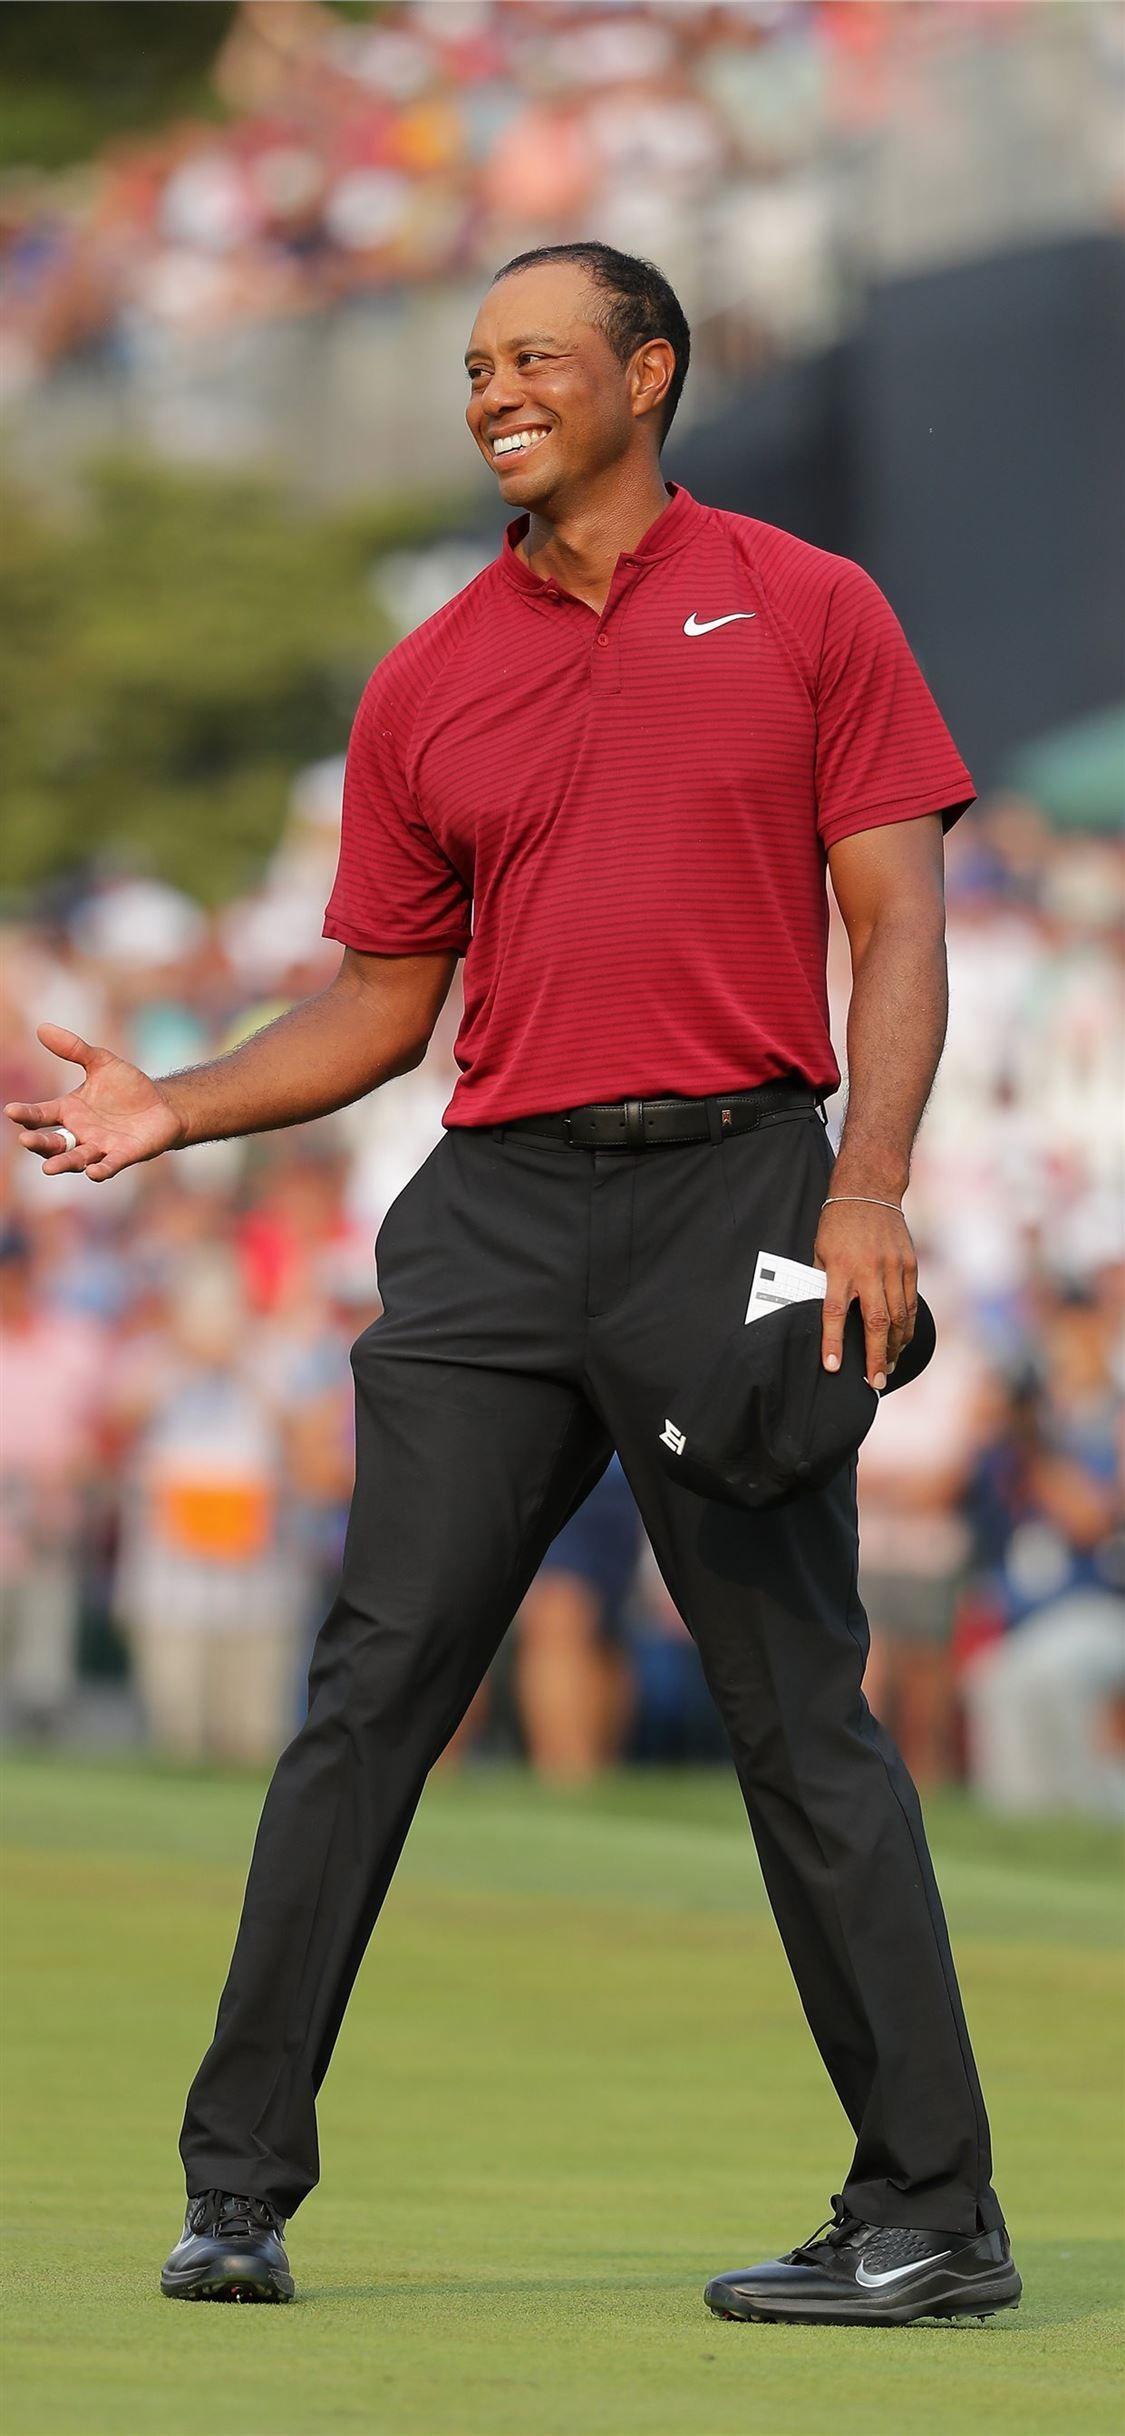 Tiger Woods Wallpaper for iPhone 7